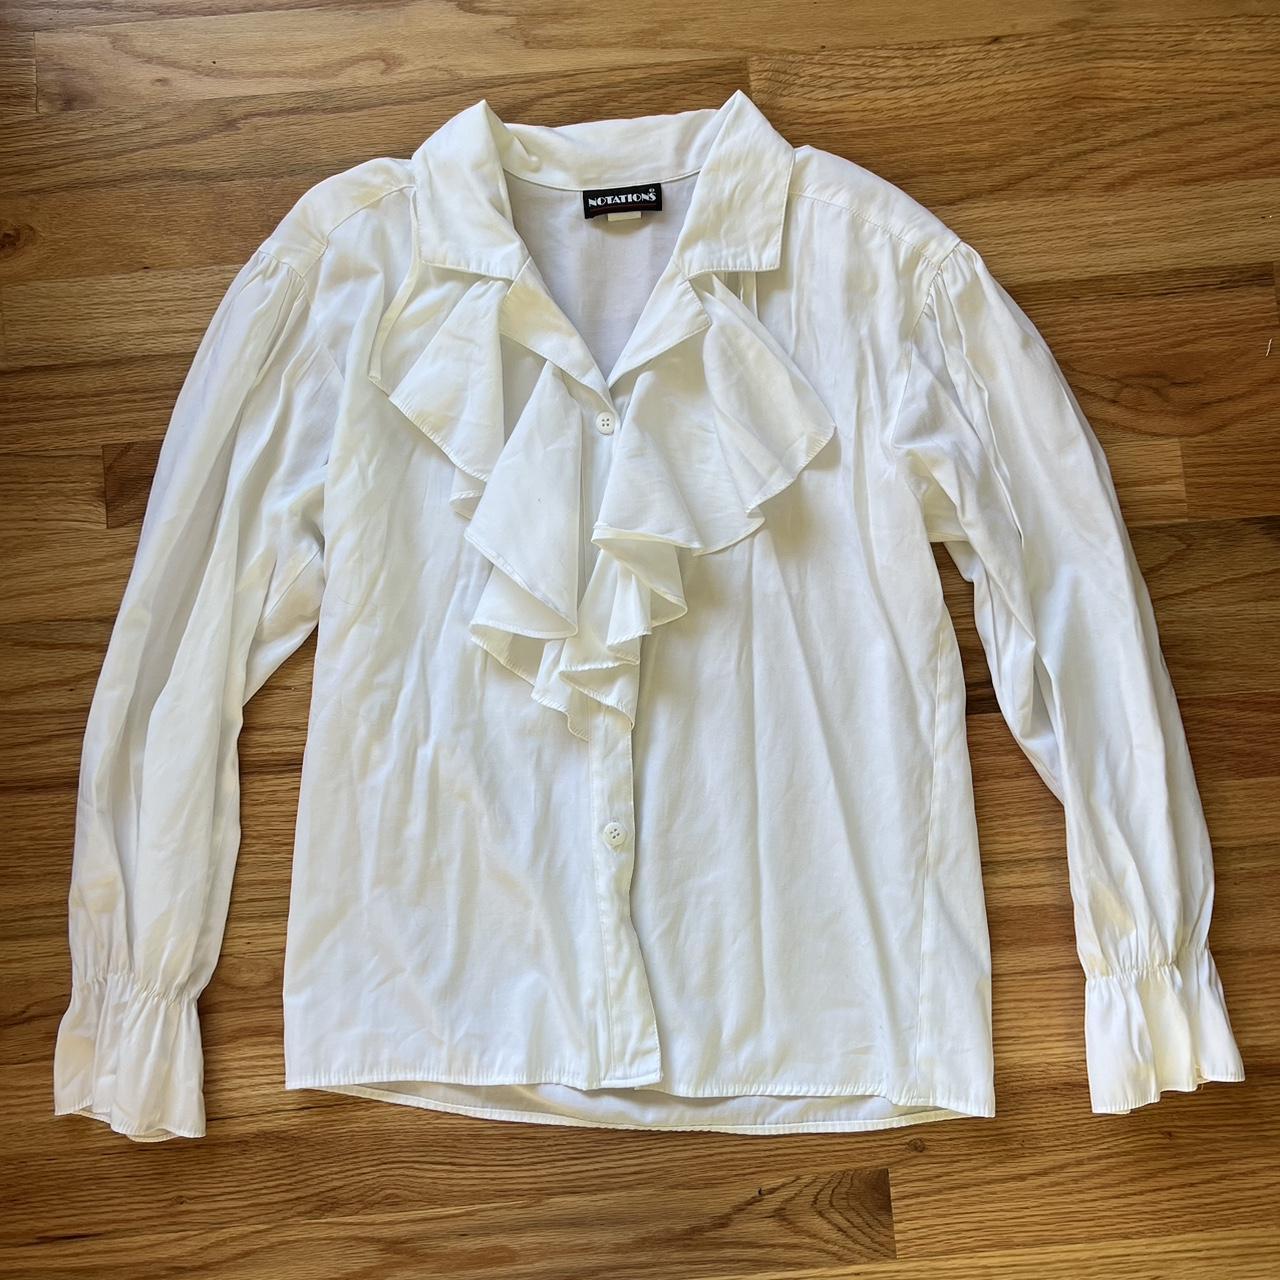 notations y2k ruffle button up top giving sexy... - Depop